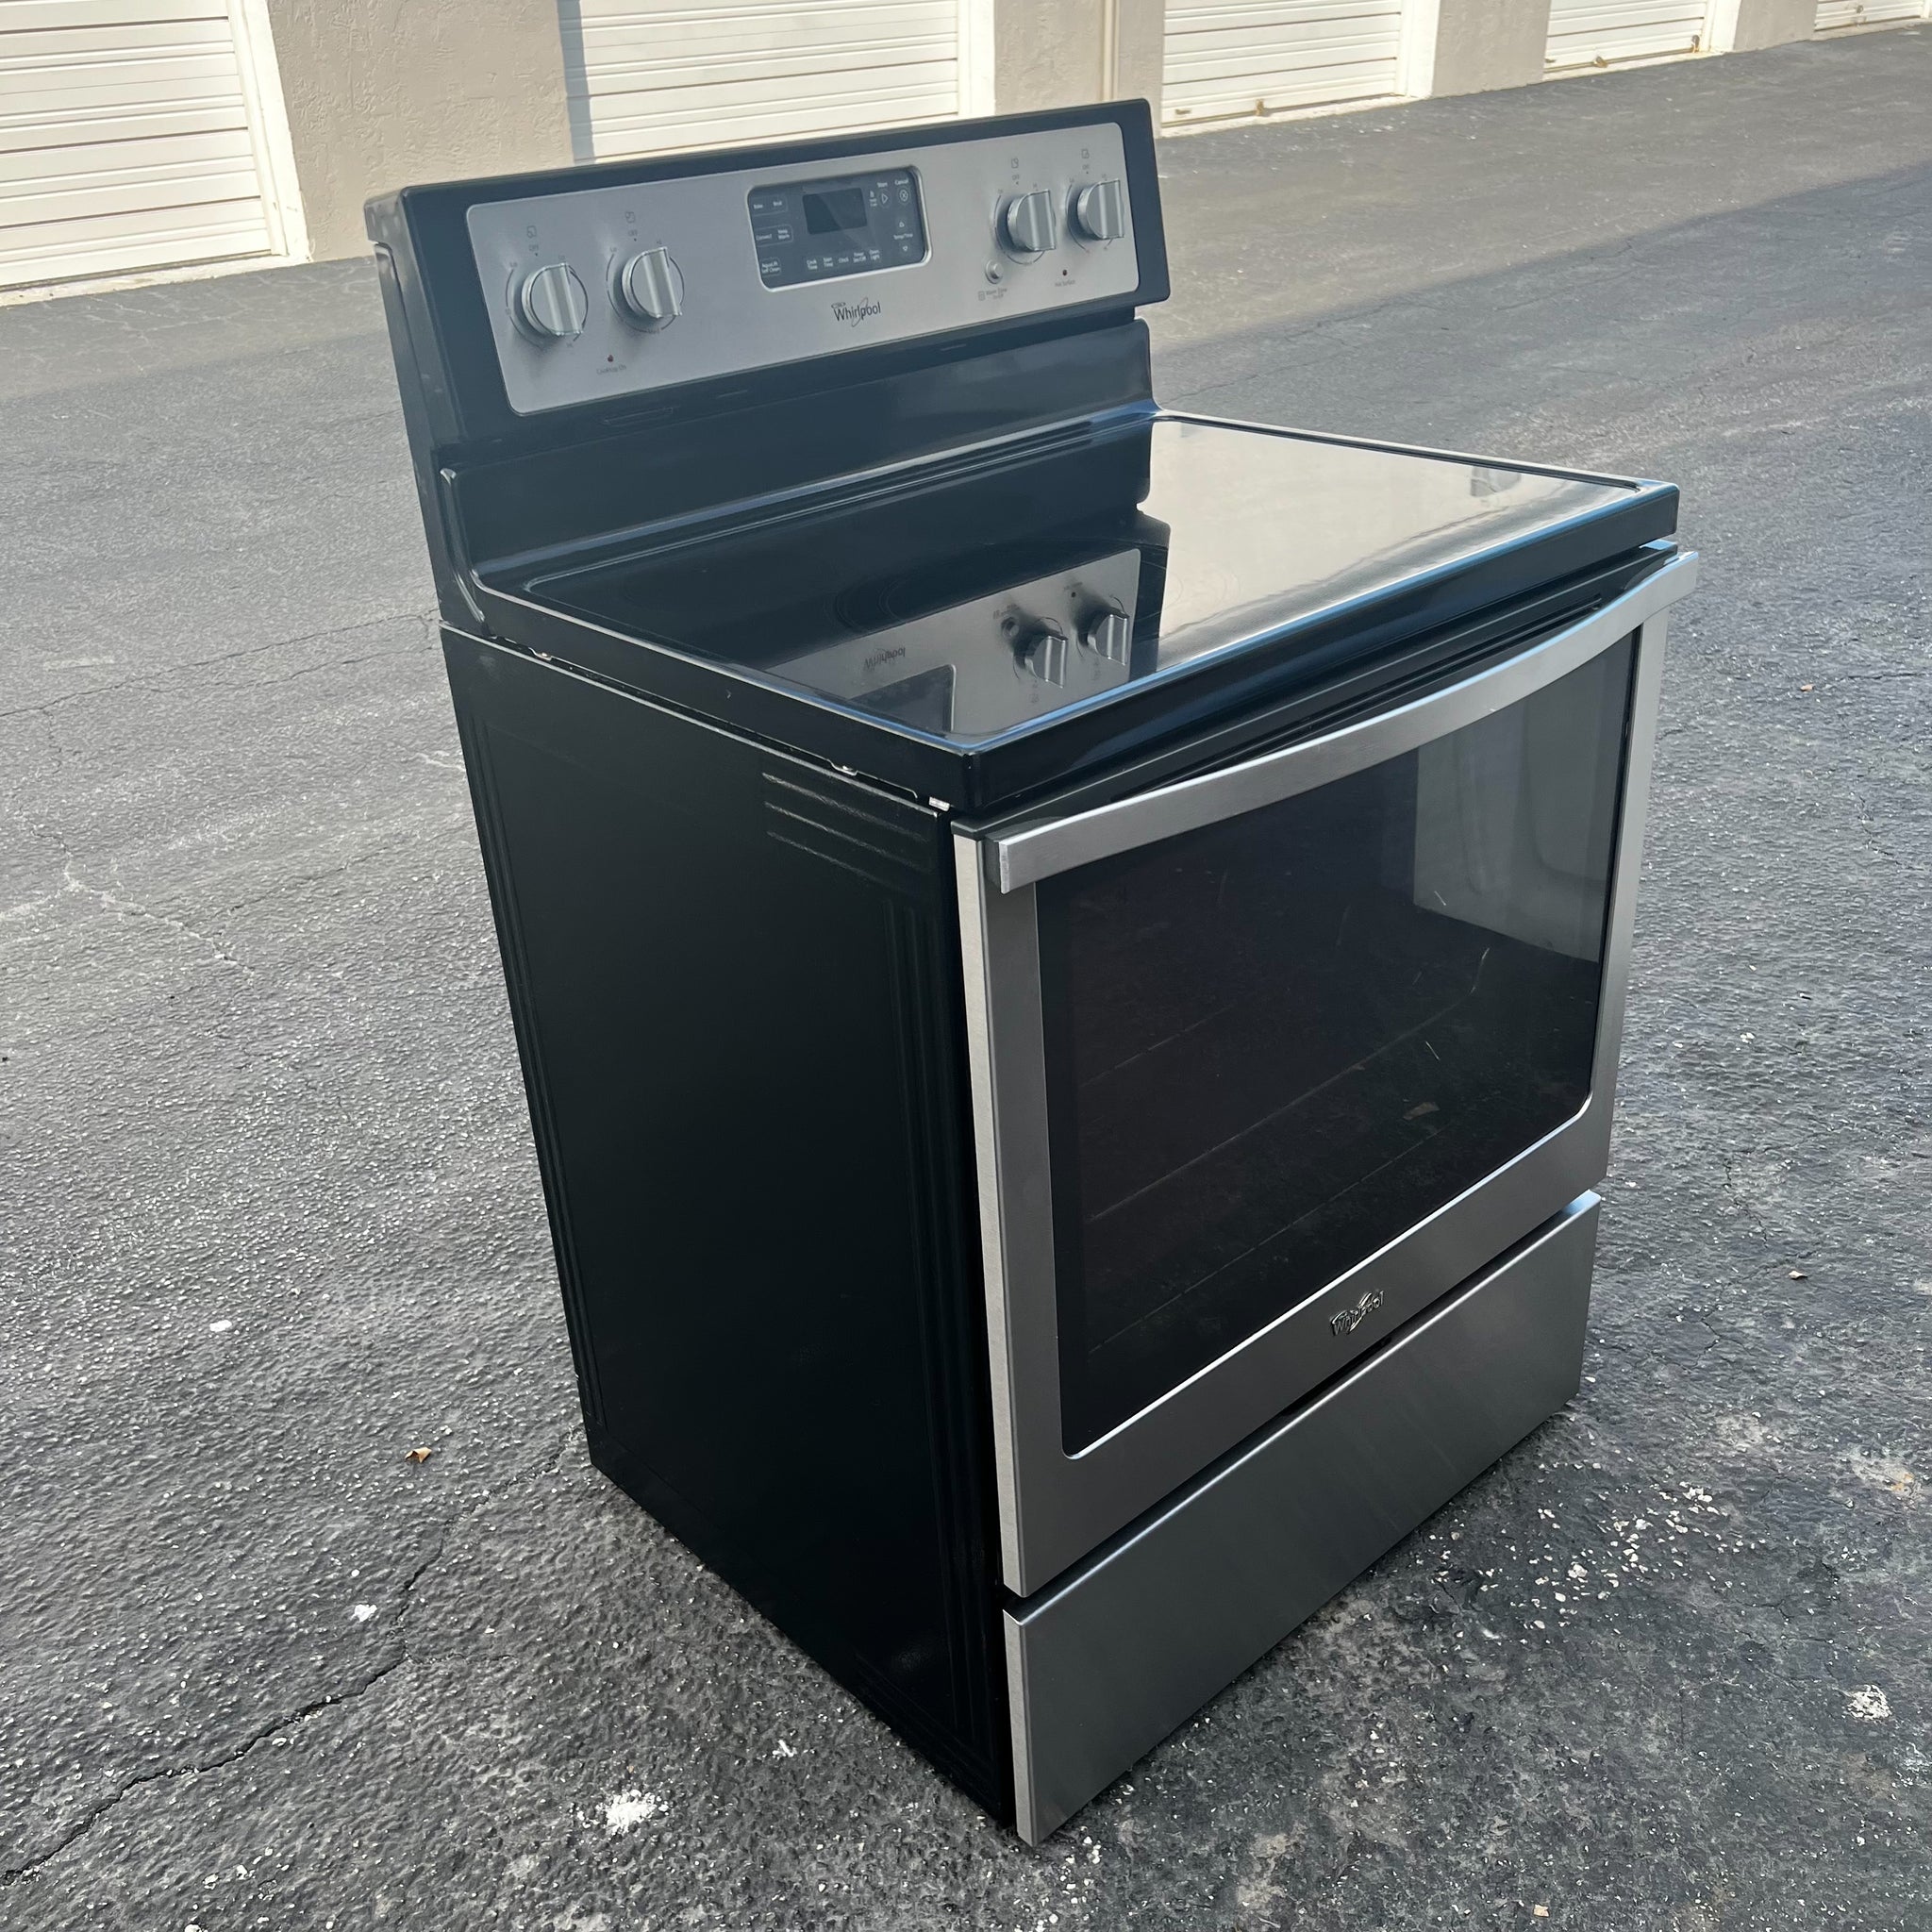 Whirlpool Stainless Steel Electric Stove